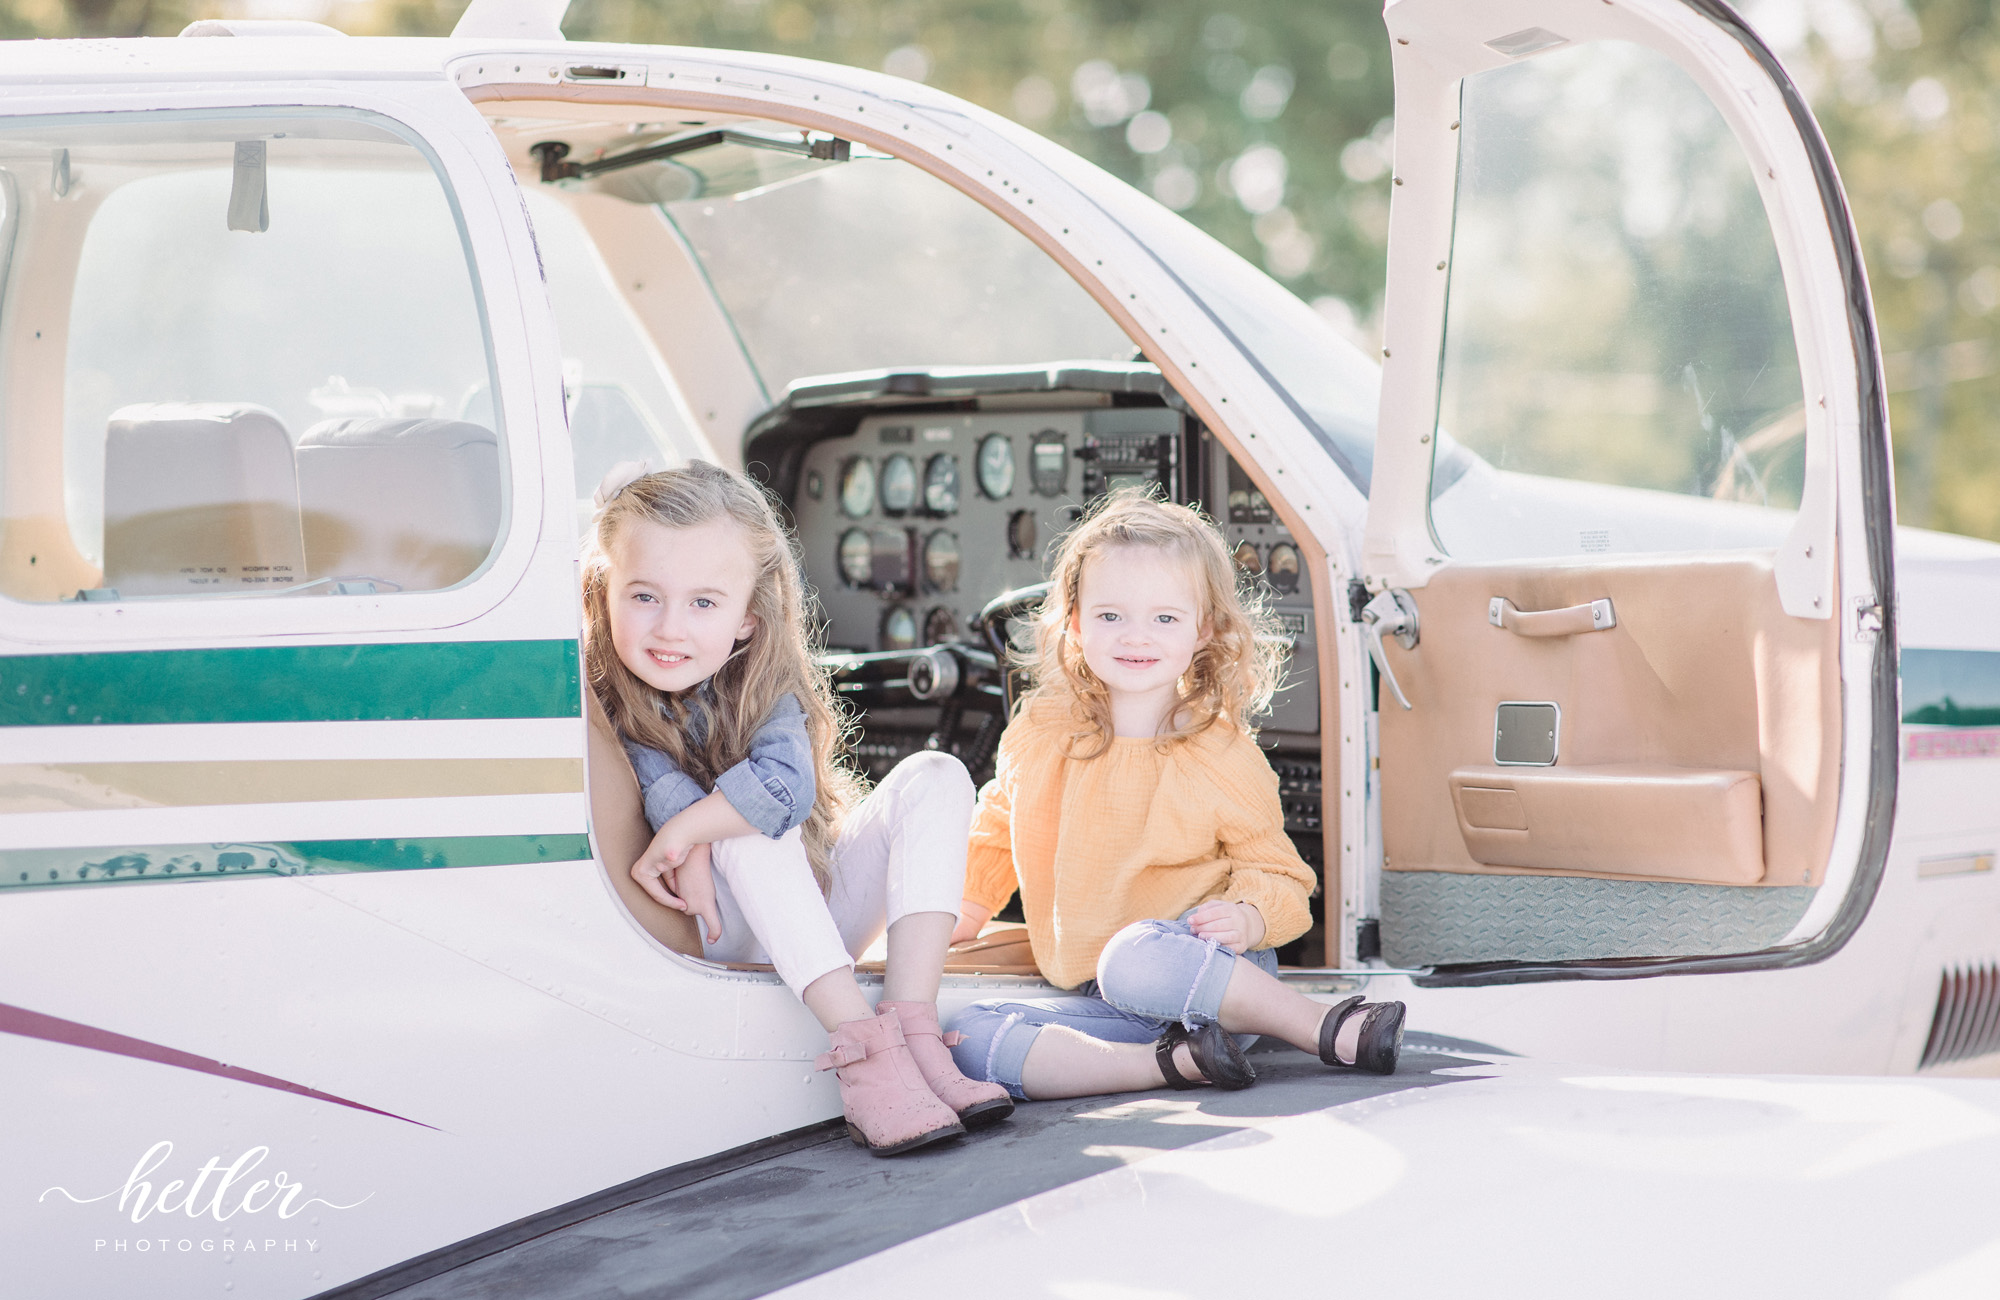 Lowell Airport family session with a personal aircraft